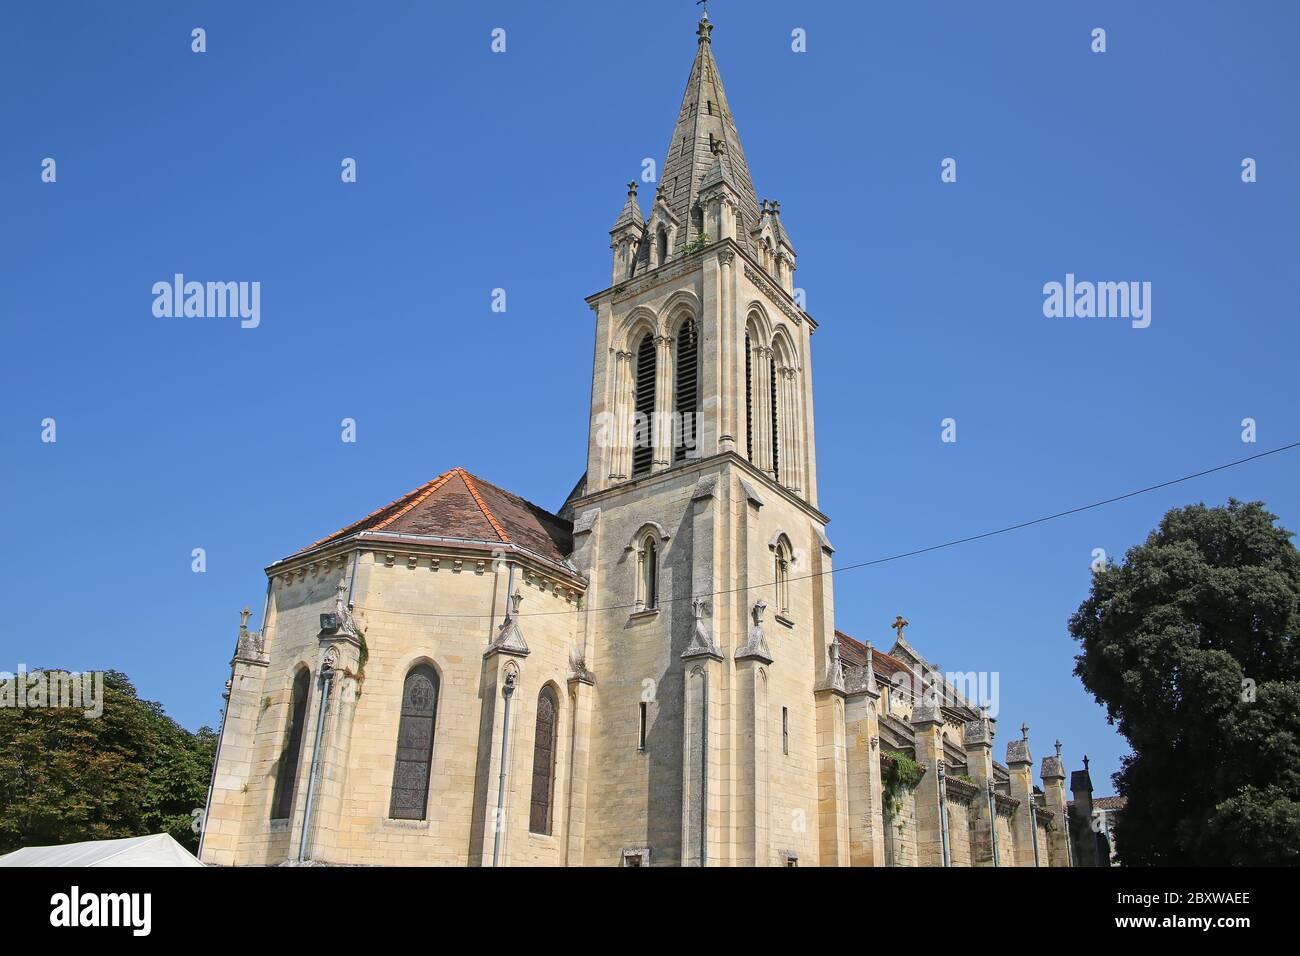 St Geronce Church in Bourg, which is a village located on Dordogne, in the heart of the wine appellation of Côtes de Bourg, Gironde, France. Stock Photo